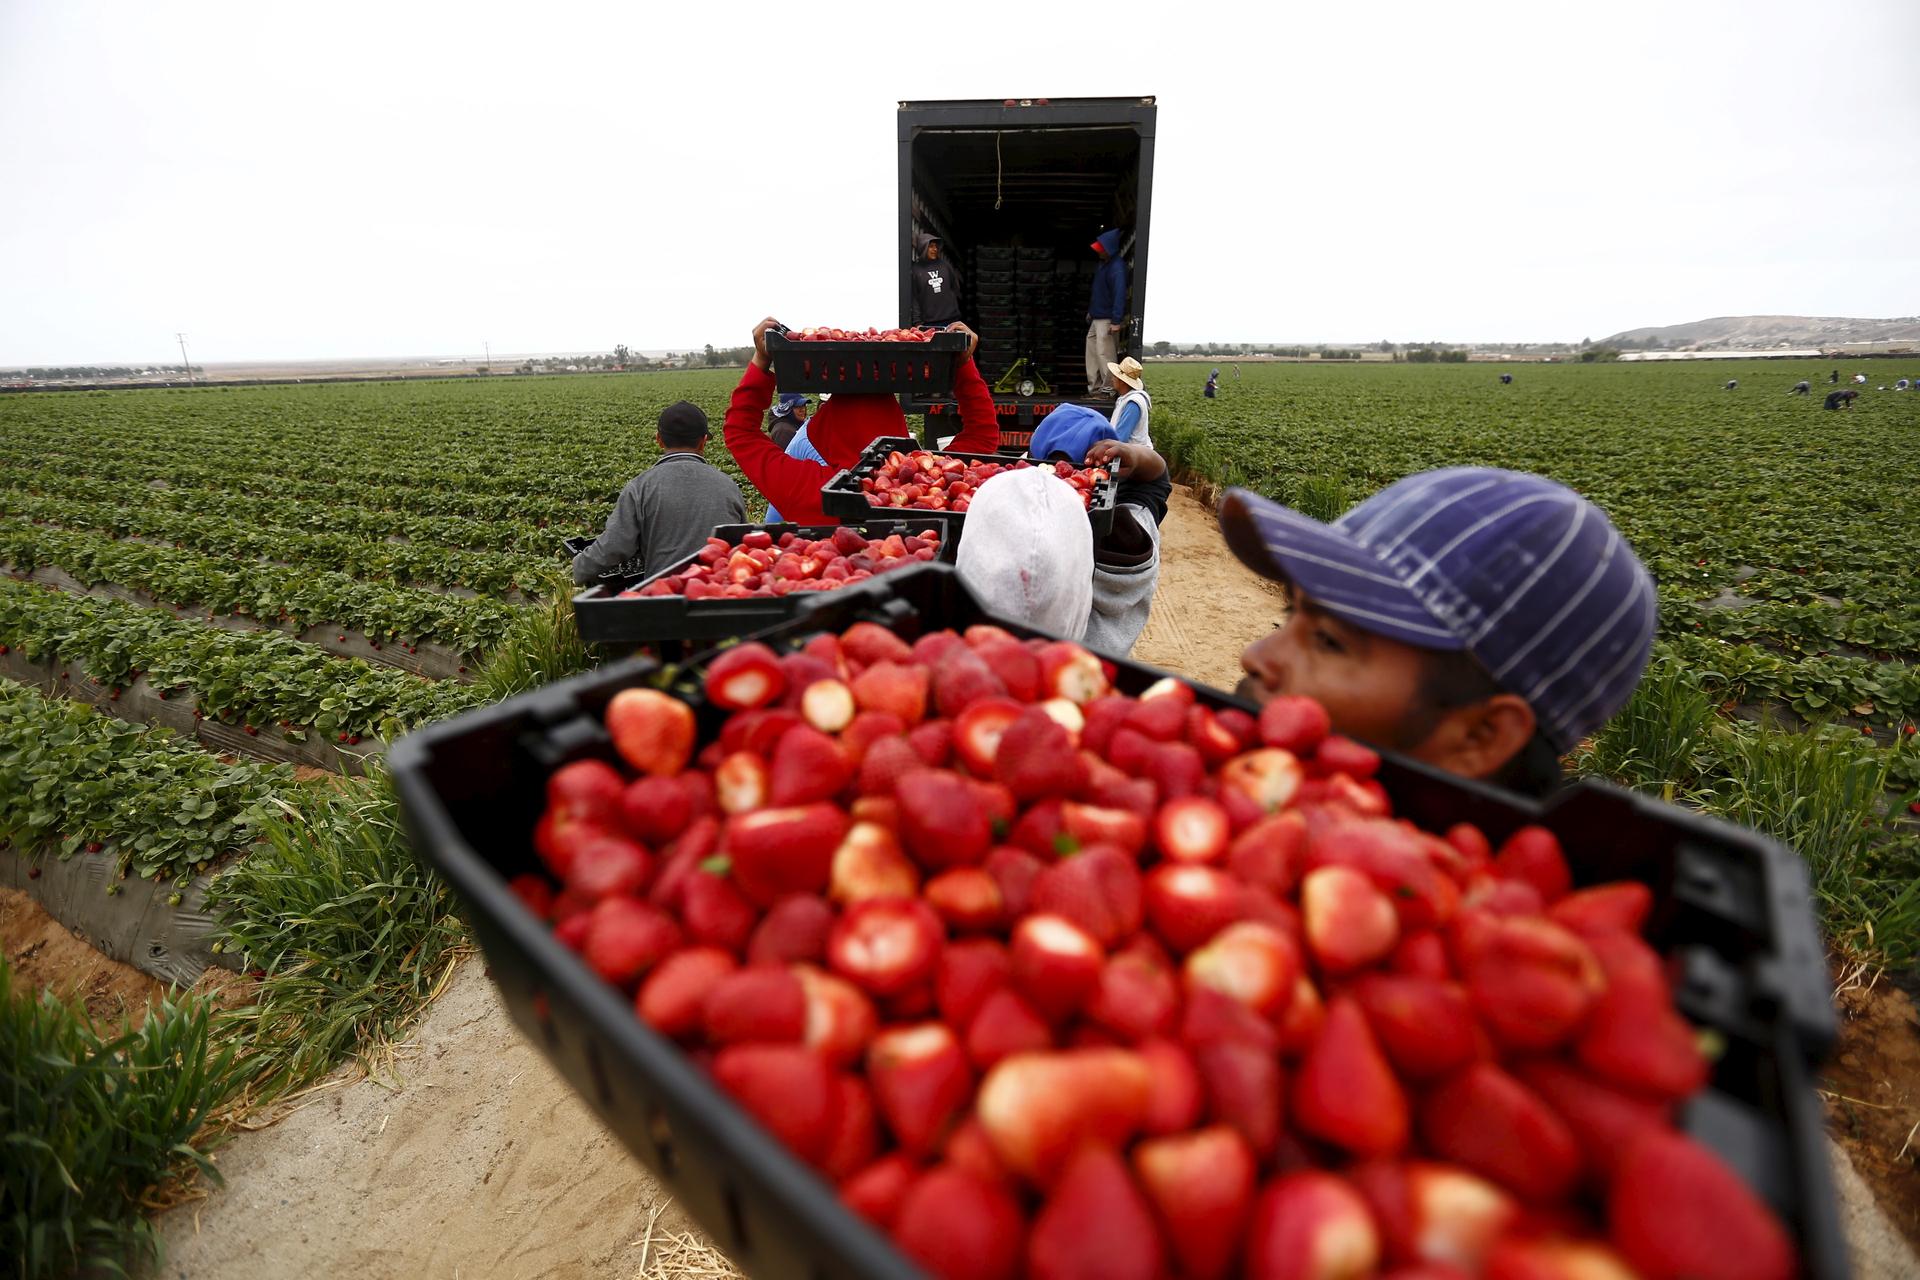 A man holds up a box of berries in a field, waiting in a queue to load them onto a truck.